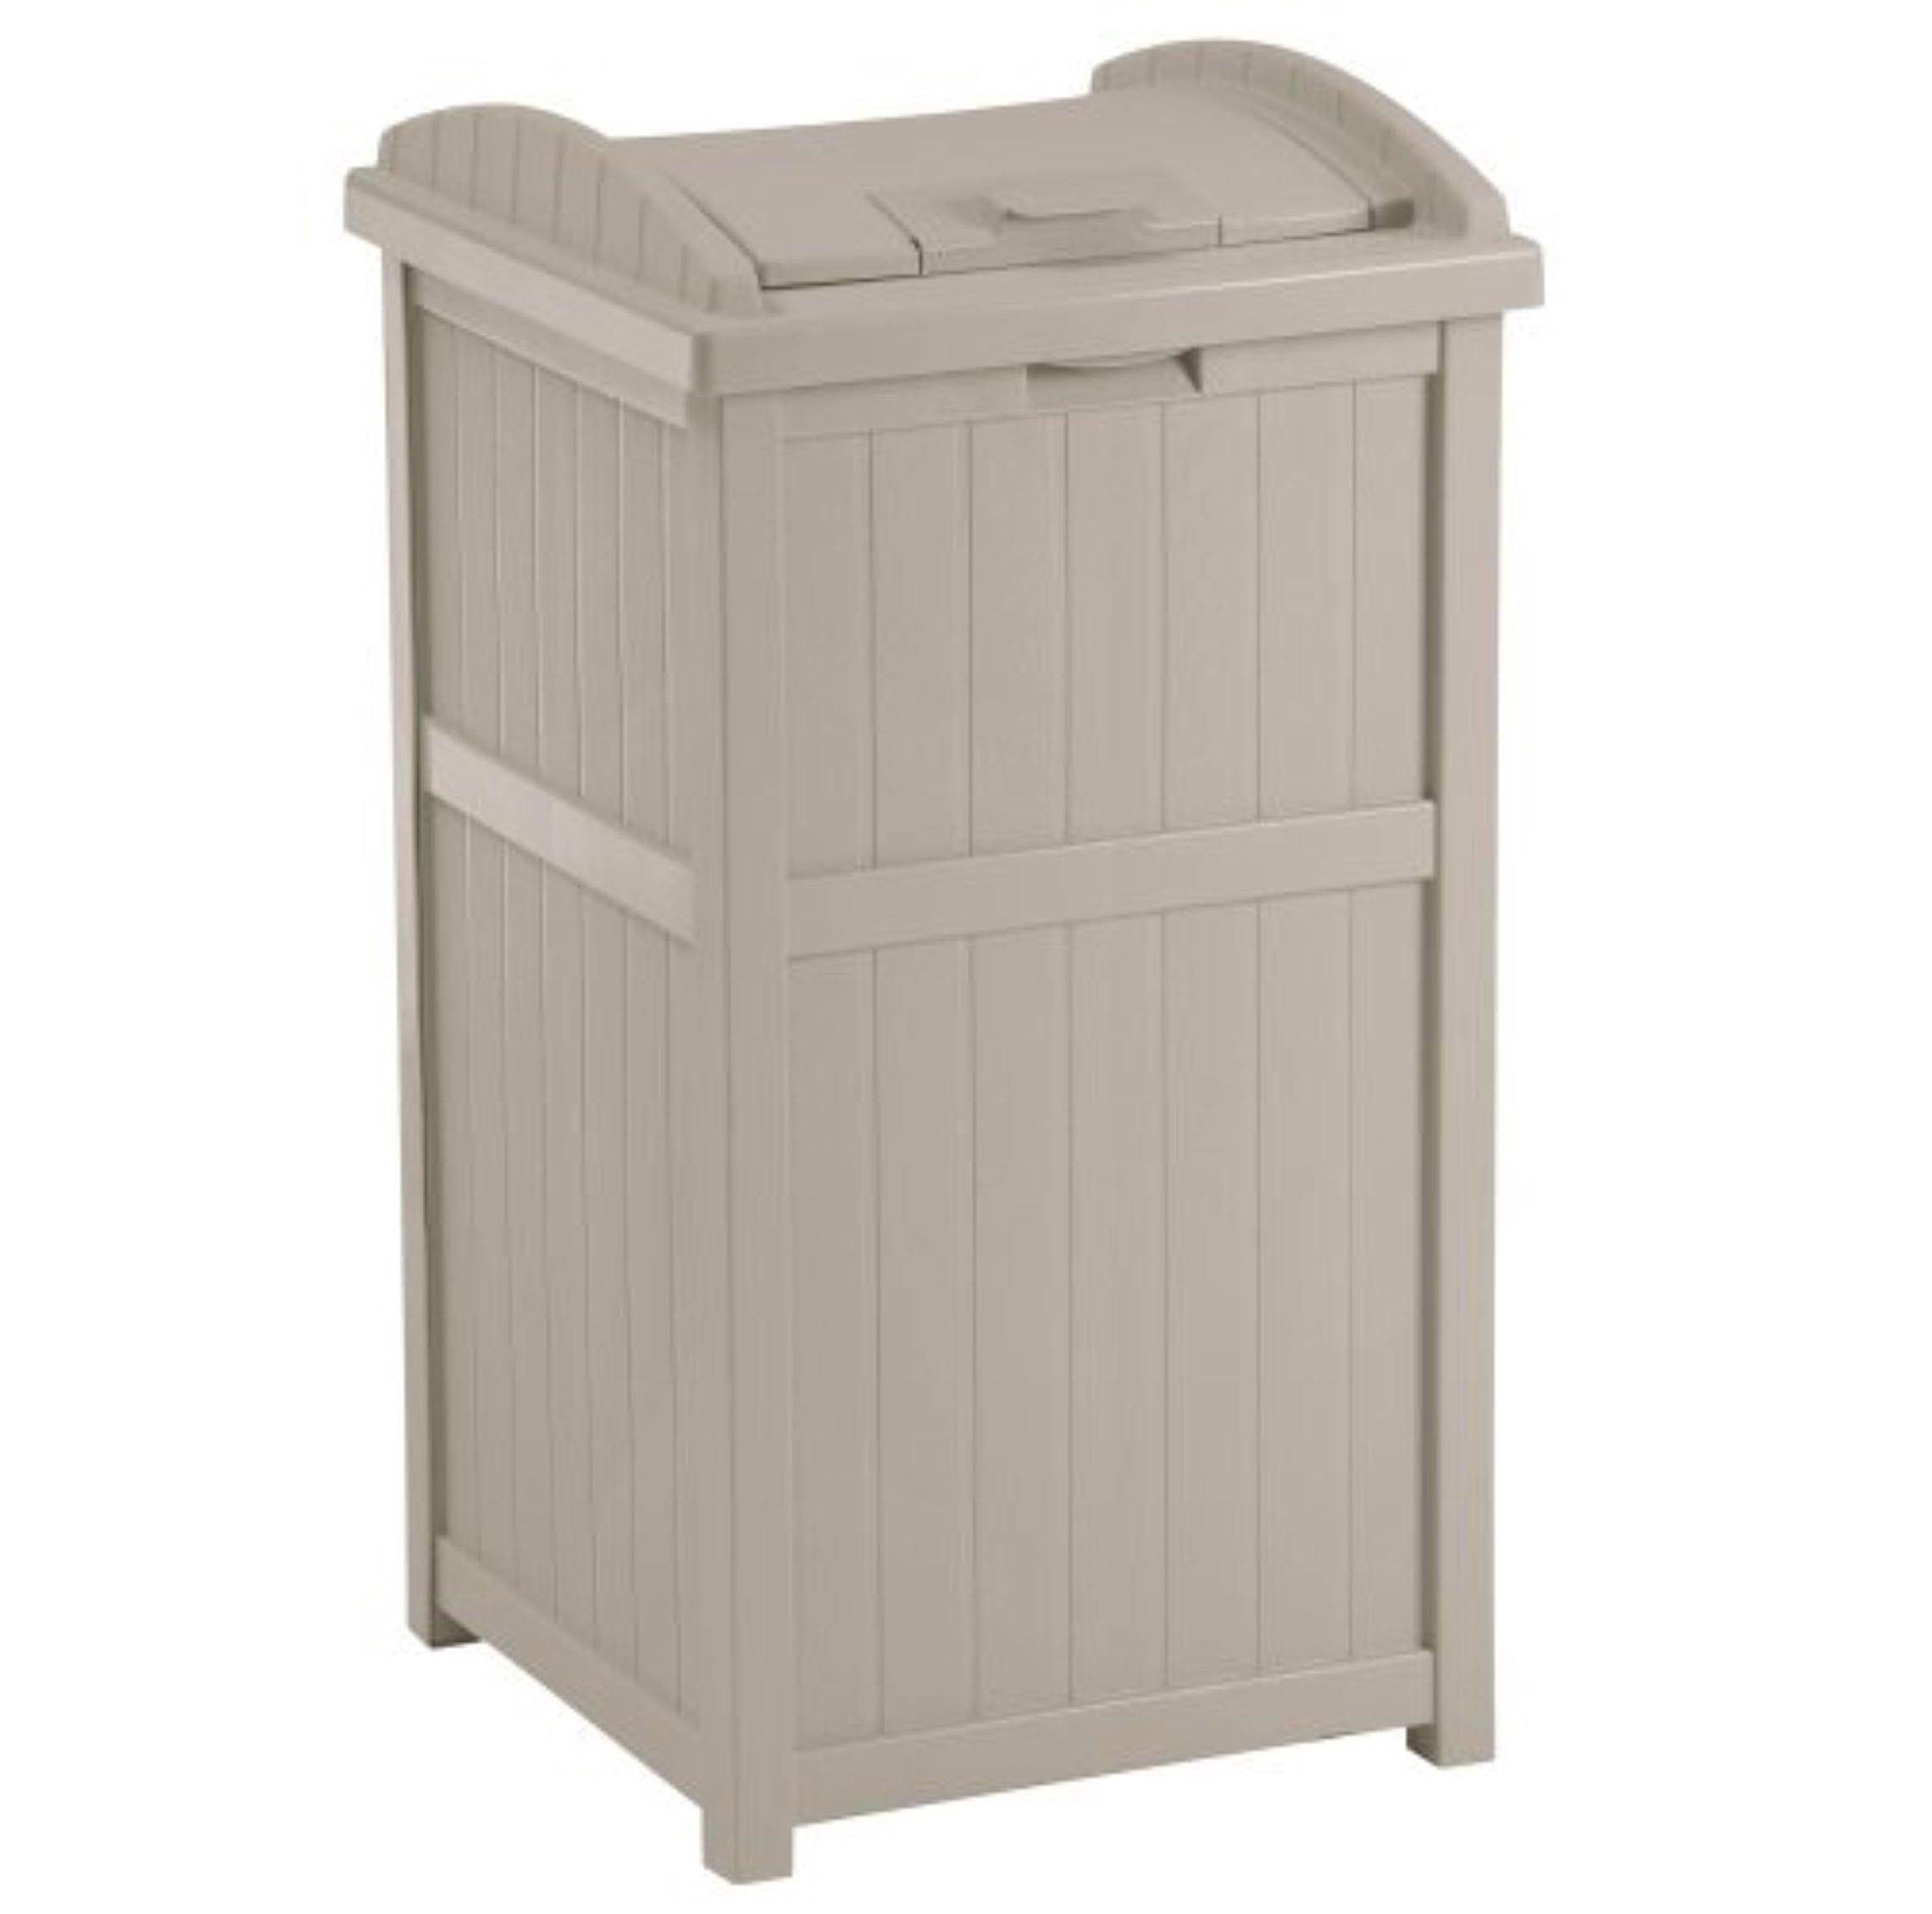 Suncast Trash Hideaway 33 Gallon Capacity Resin Outdoor Garbage Container, Taupe - image 1 of 5